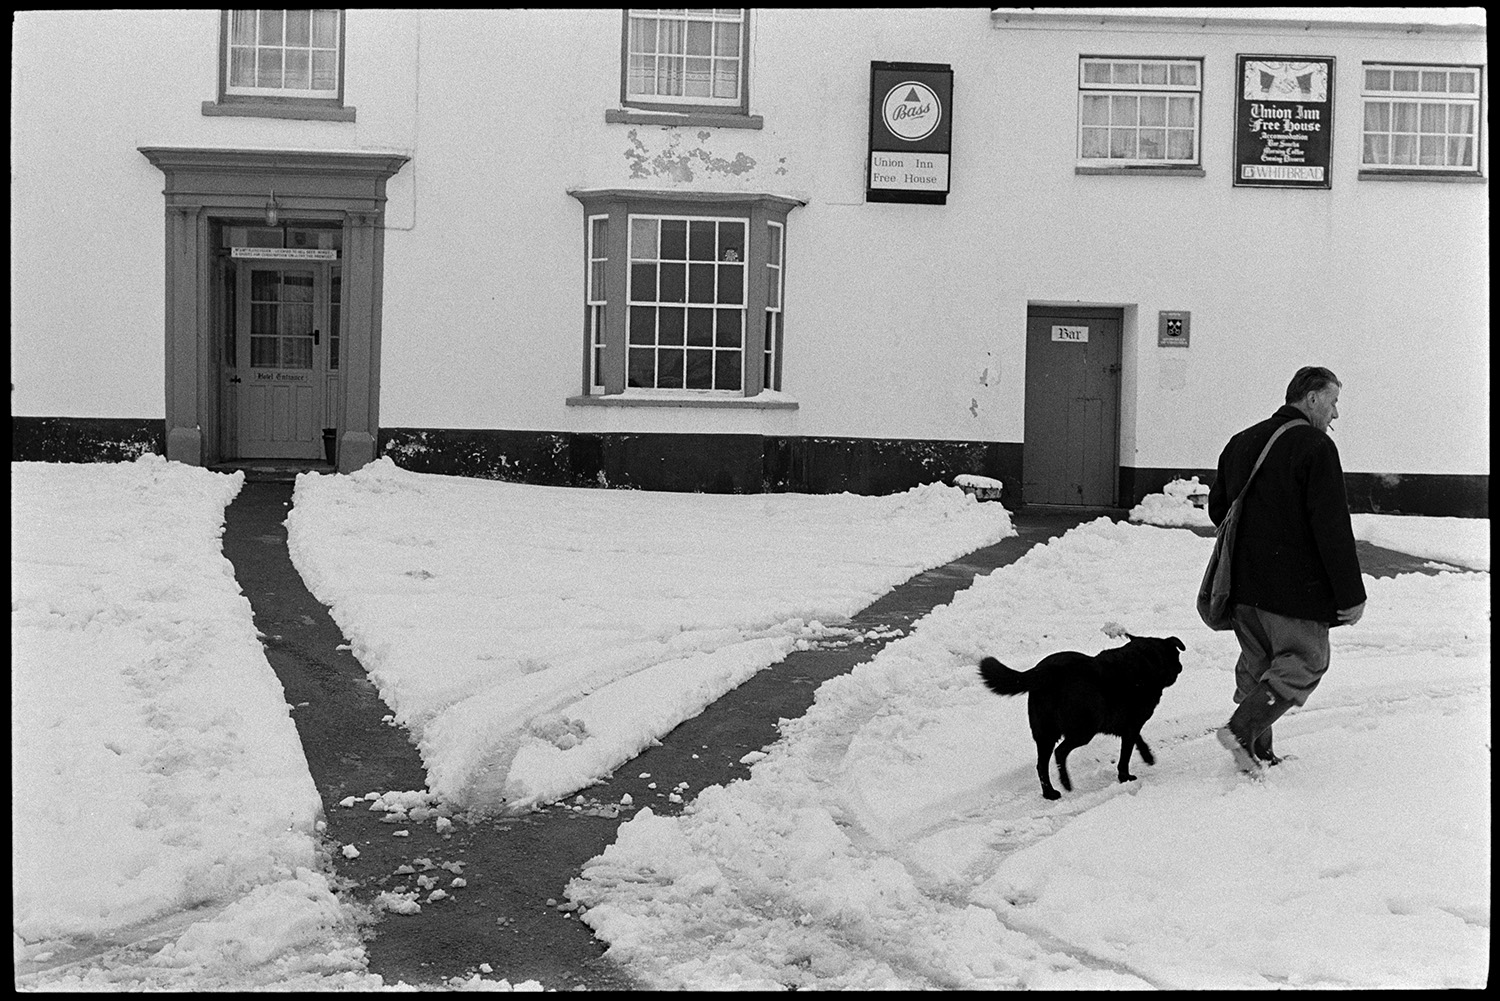 Snow, Street scenes postman and dog, children throwing snowballs, people chatting. 
[Harold Nott, also known as Joe Bec, a postman, walking through snow outside the Union Inn pub in Dolton. He is accompanied by a dog. Two pathways have been cleared through the snow to the pub doors.]